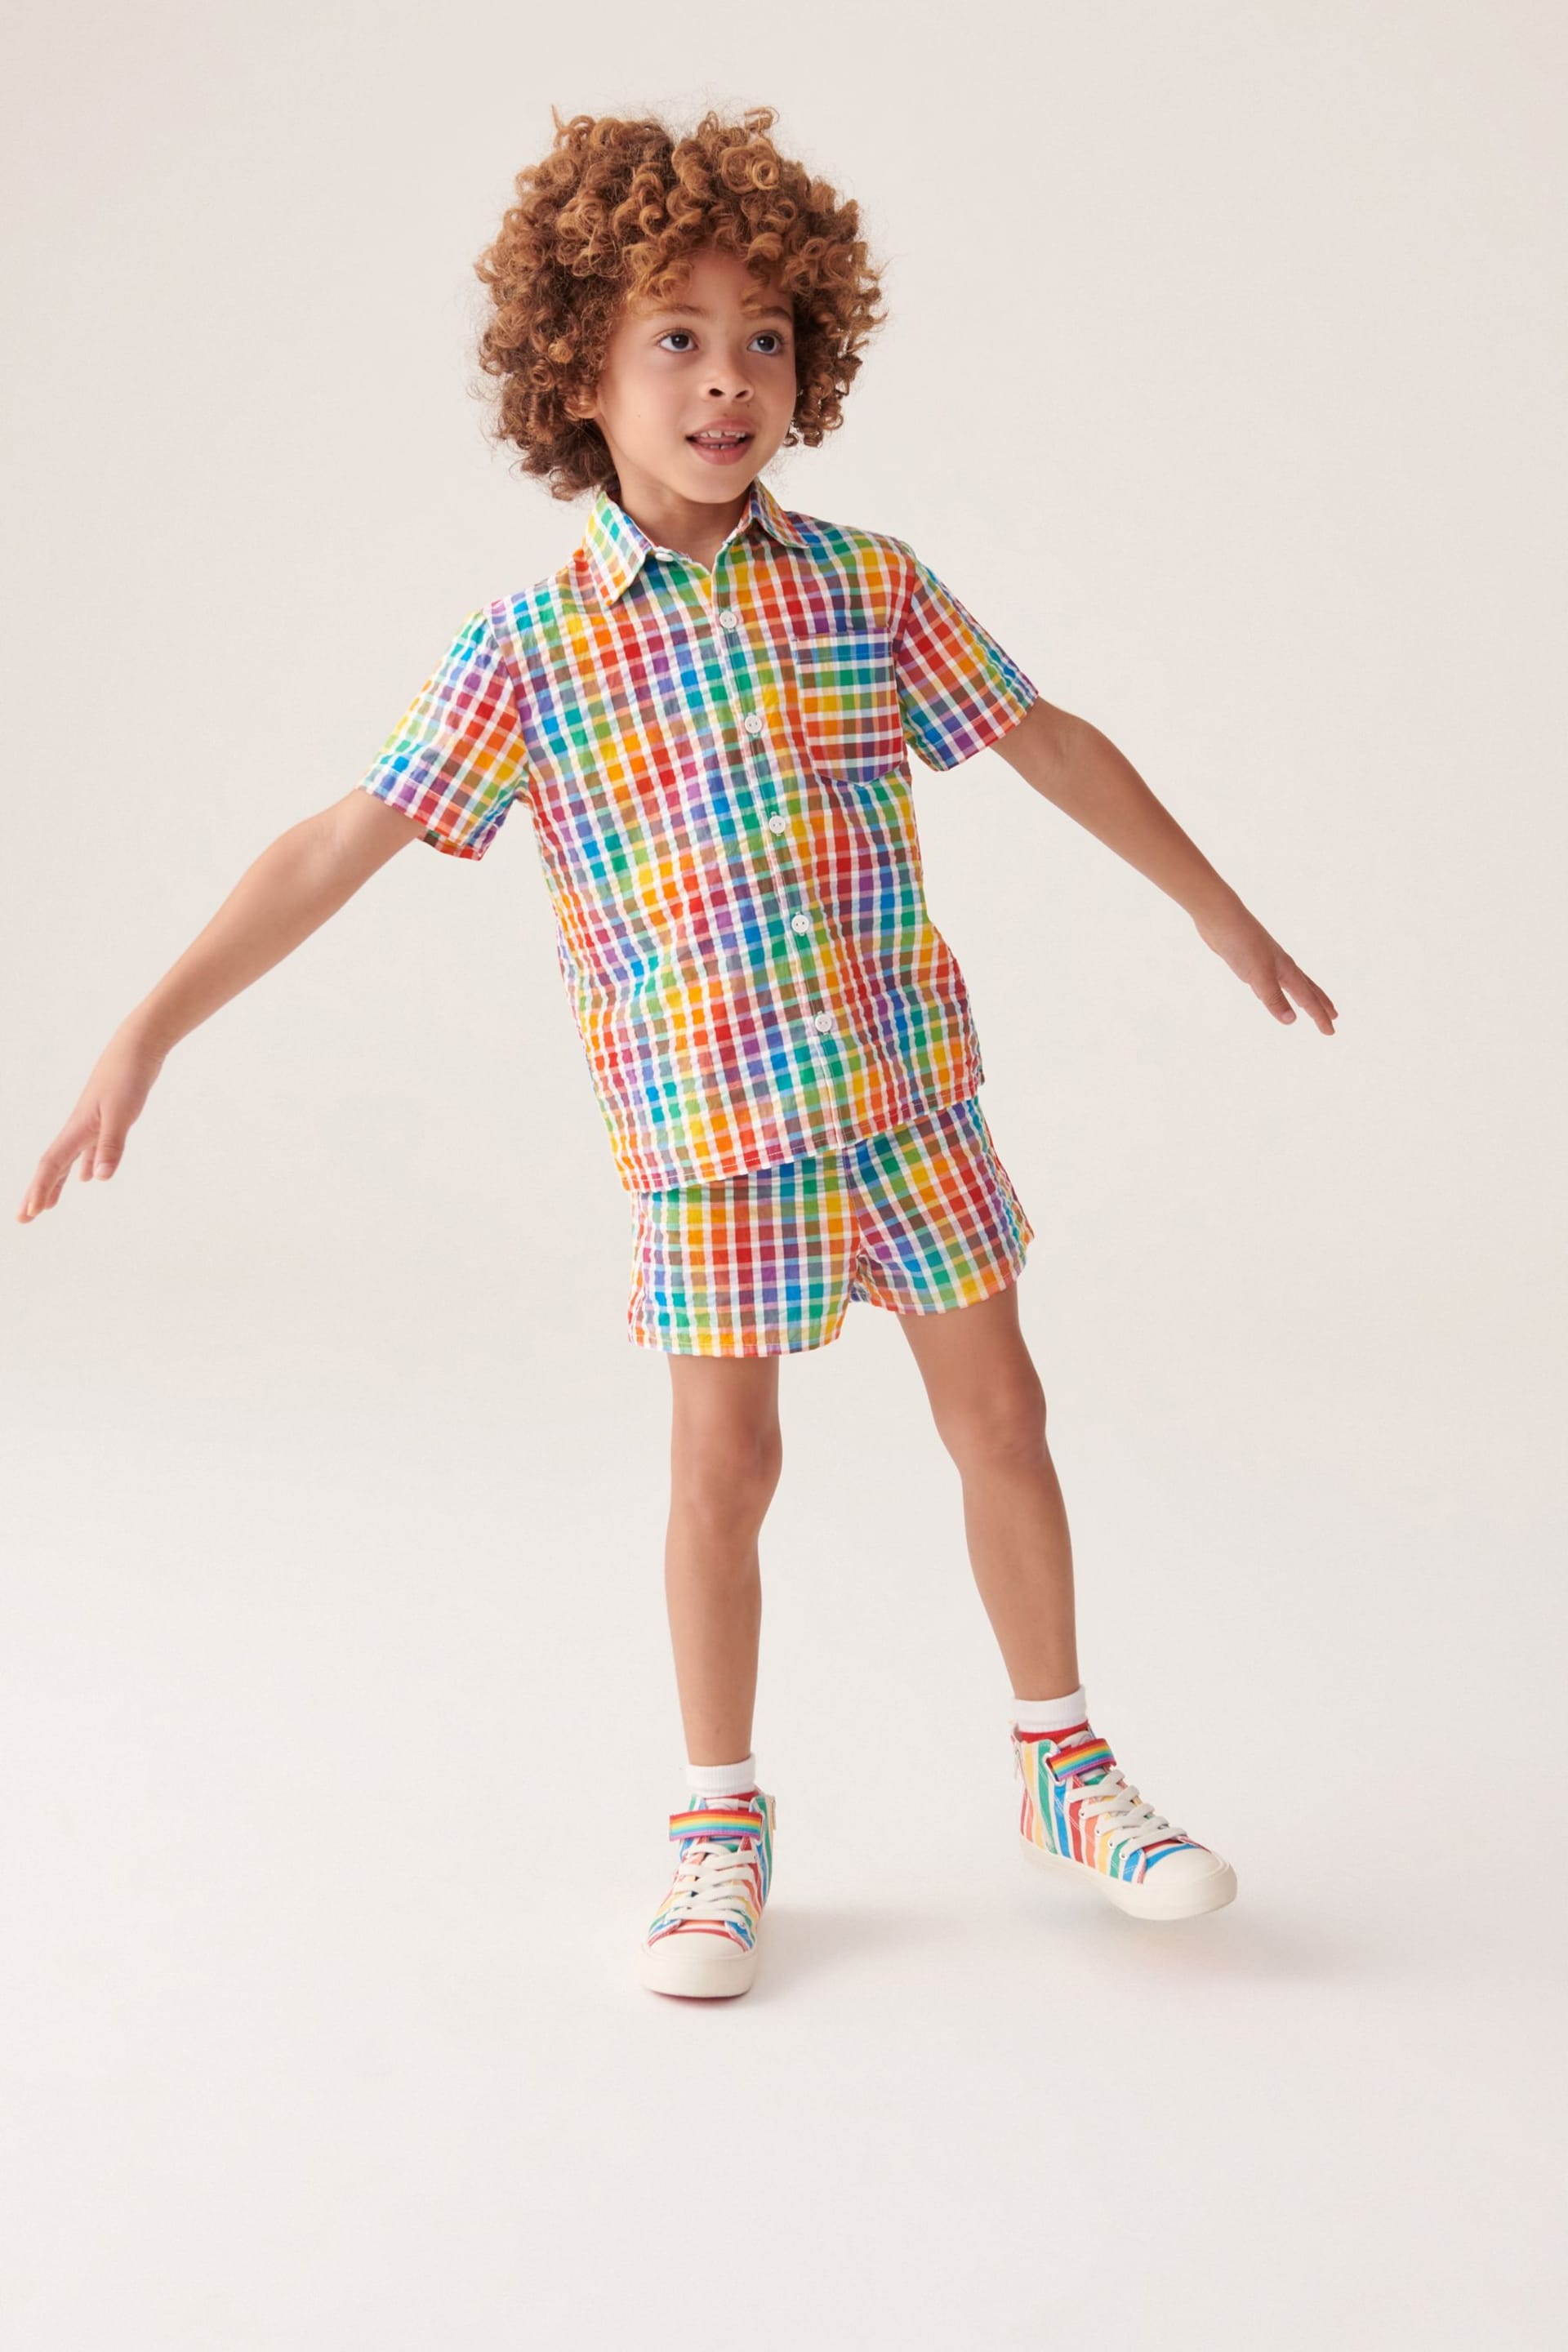 Little Bird by Jools Oliver Multi/Check Colourful Shirt and Short Set - Image 1 of 10